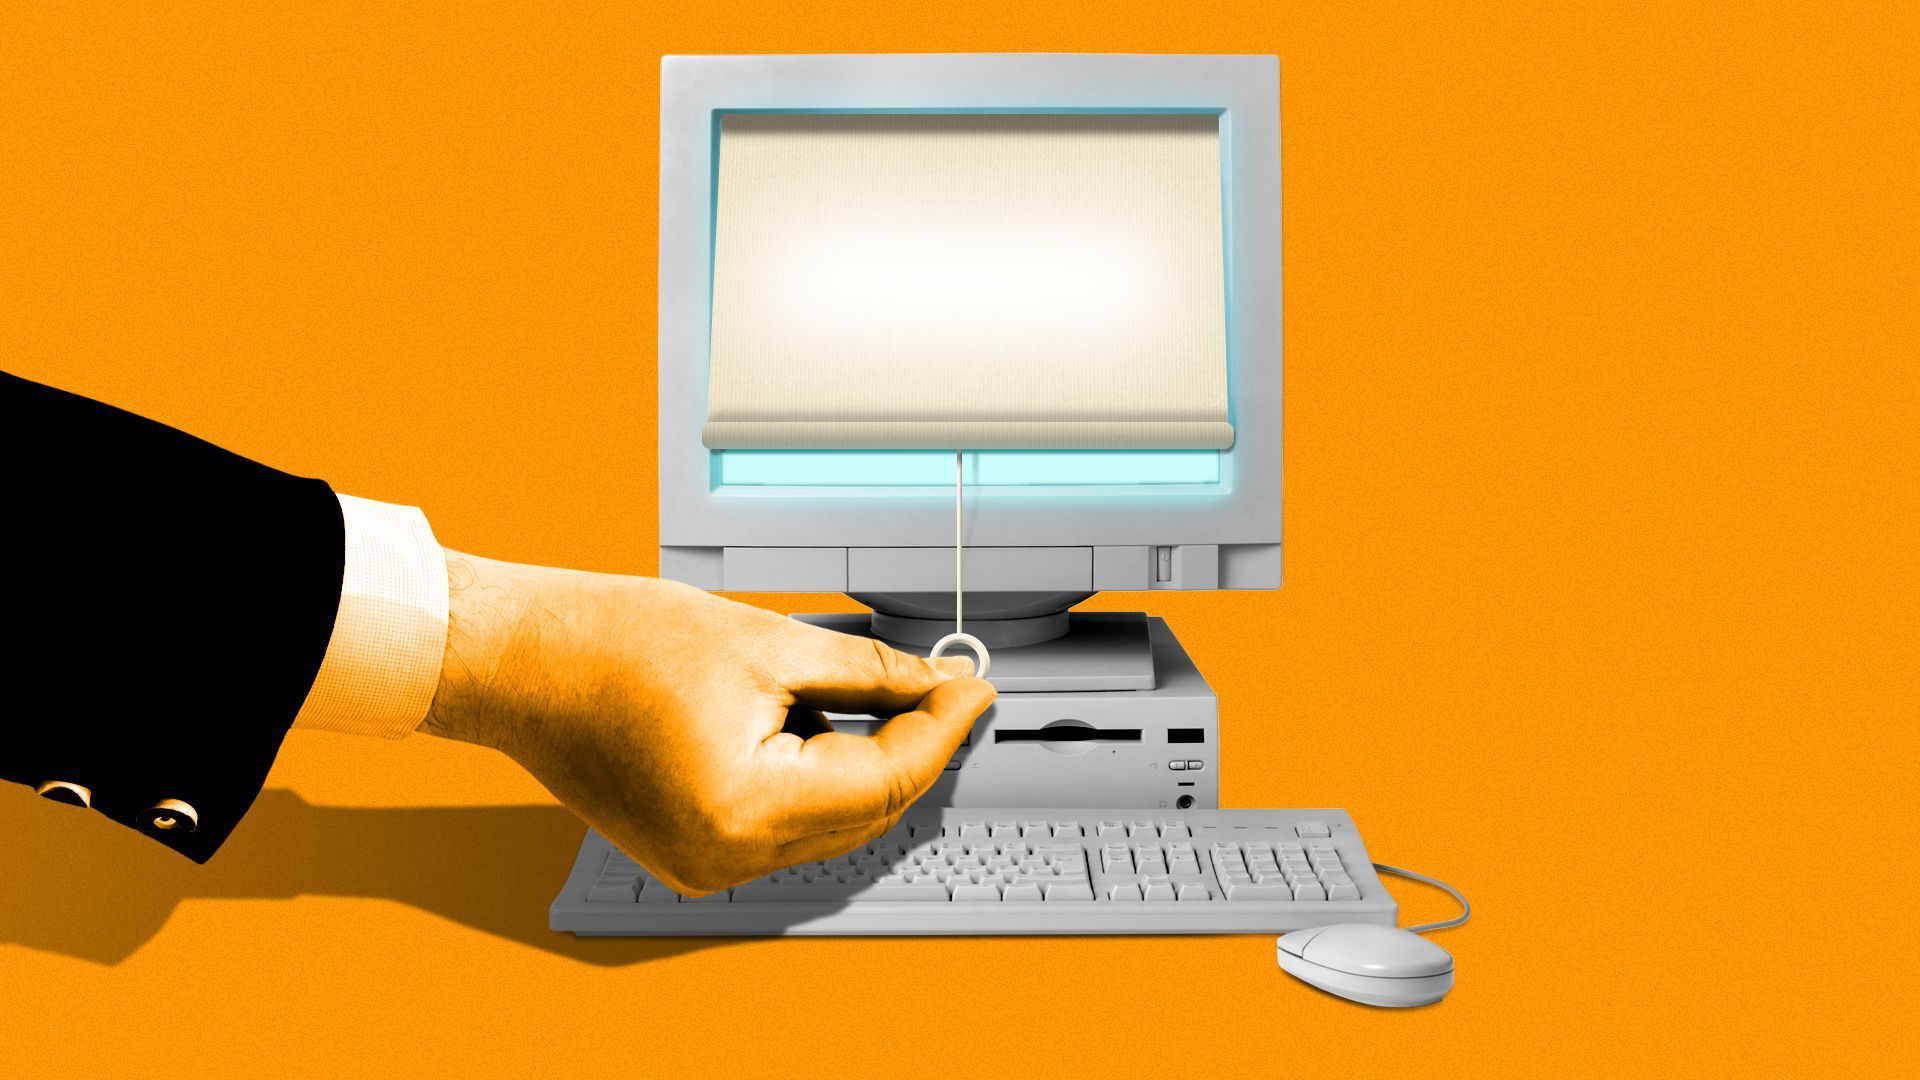 Image of a laptop computer with a hand pulling down a window shade in front of the monitor.